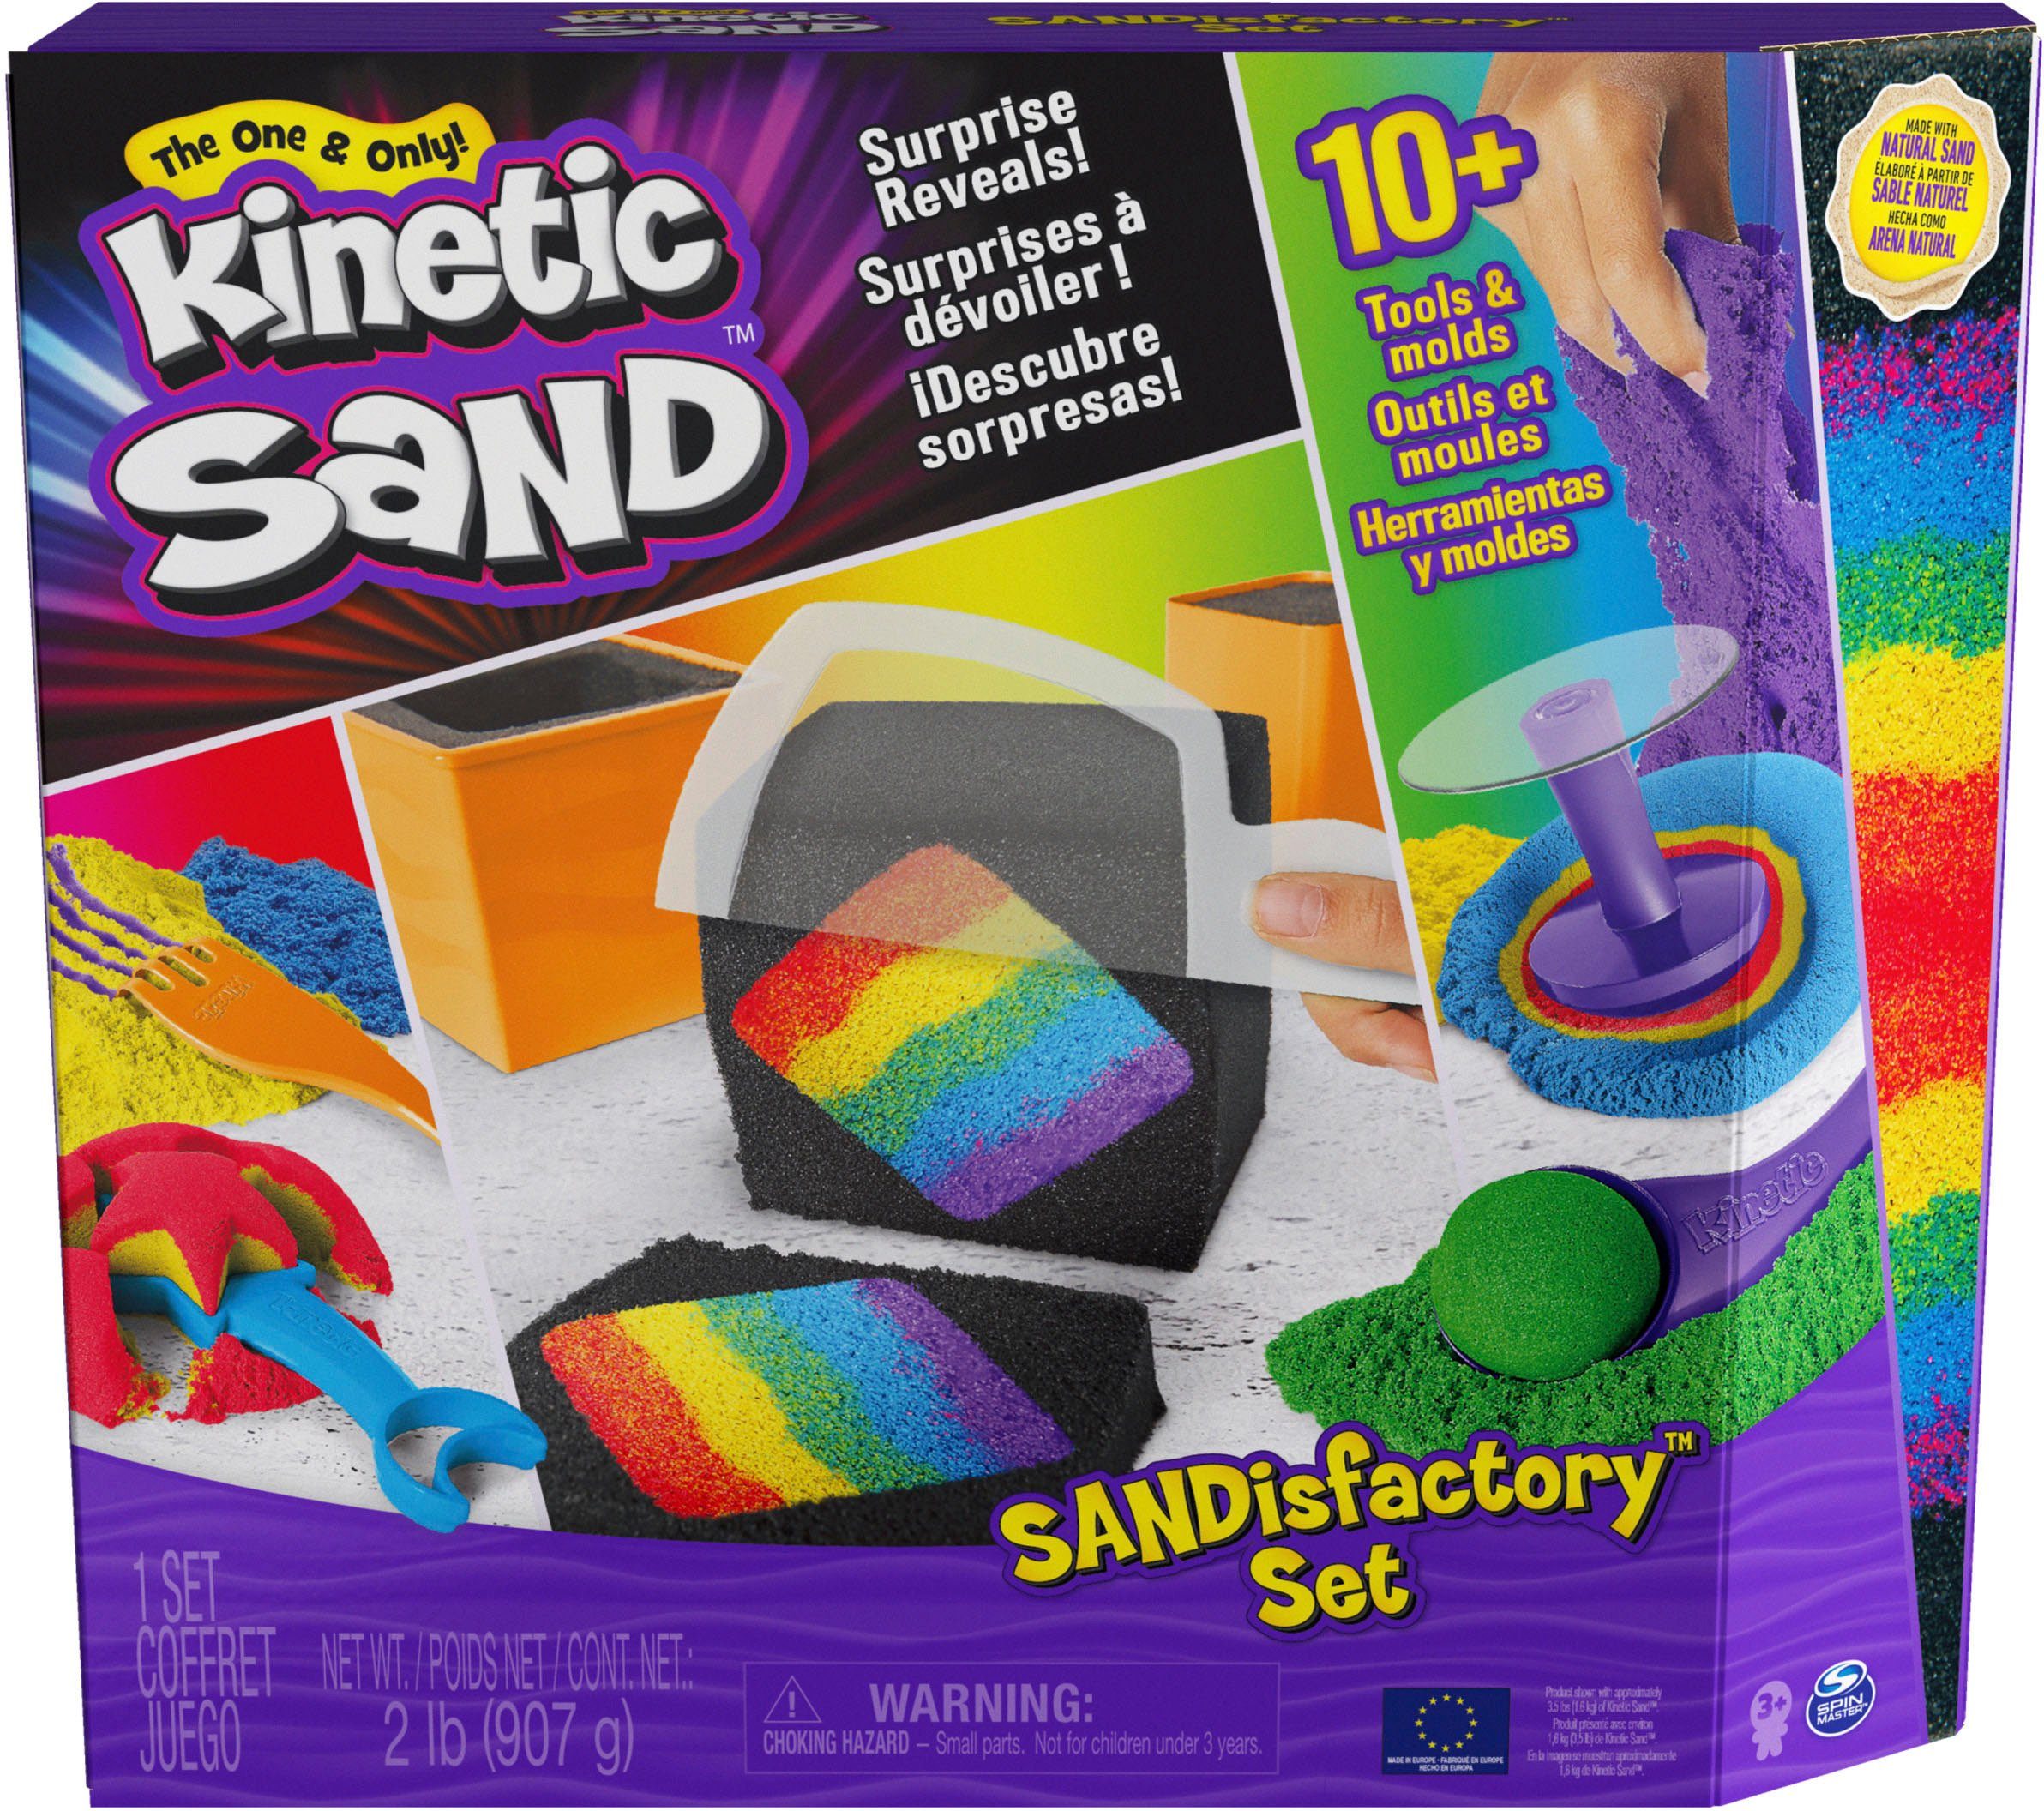 Spin Master Sand, Europe in Kinetic Made Kreativset Set, Sandisfactory